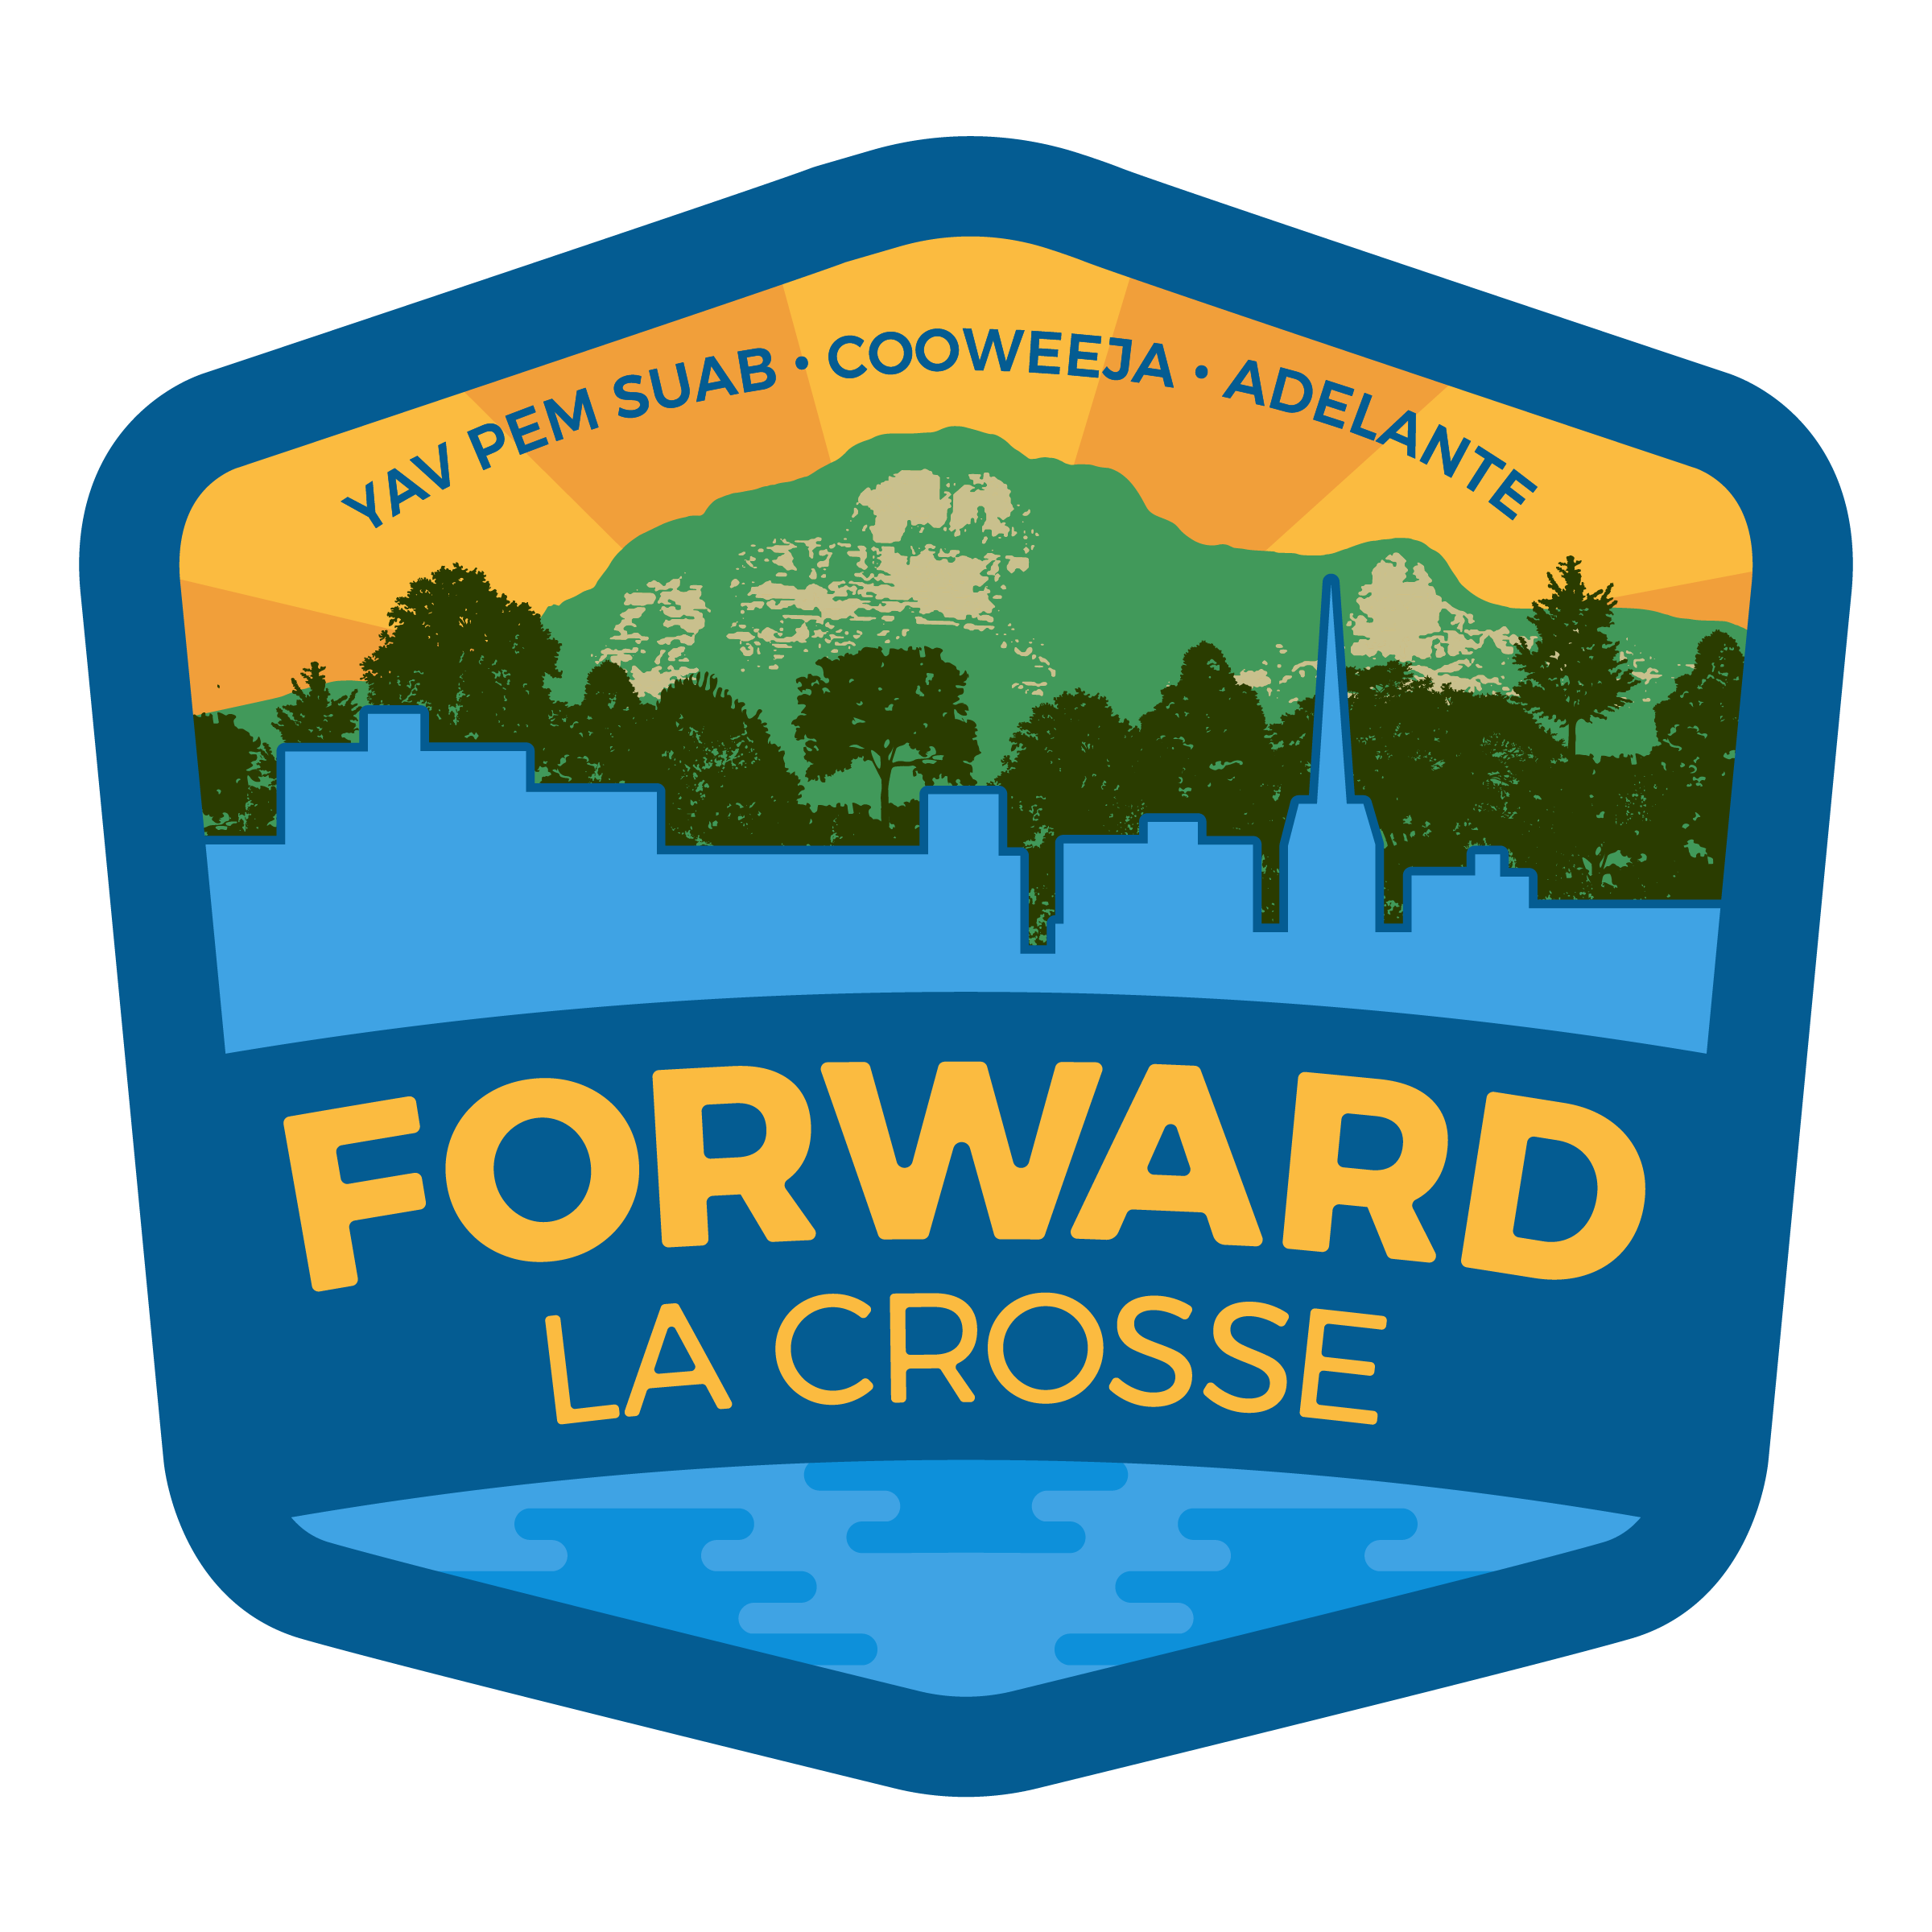 City of La Crosse is kicking off its Comprehensive Plan Project with Forward La Crosse!